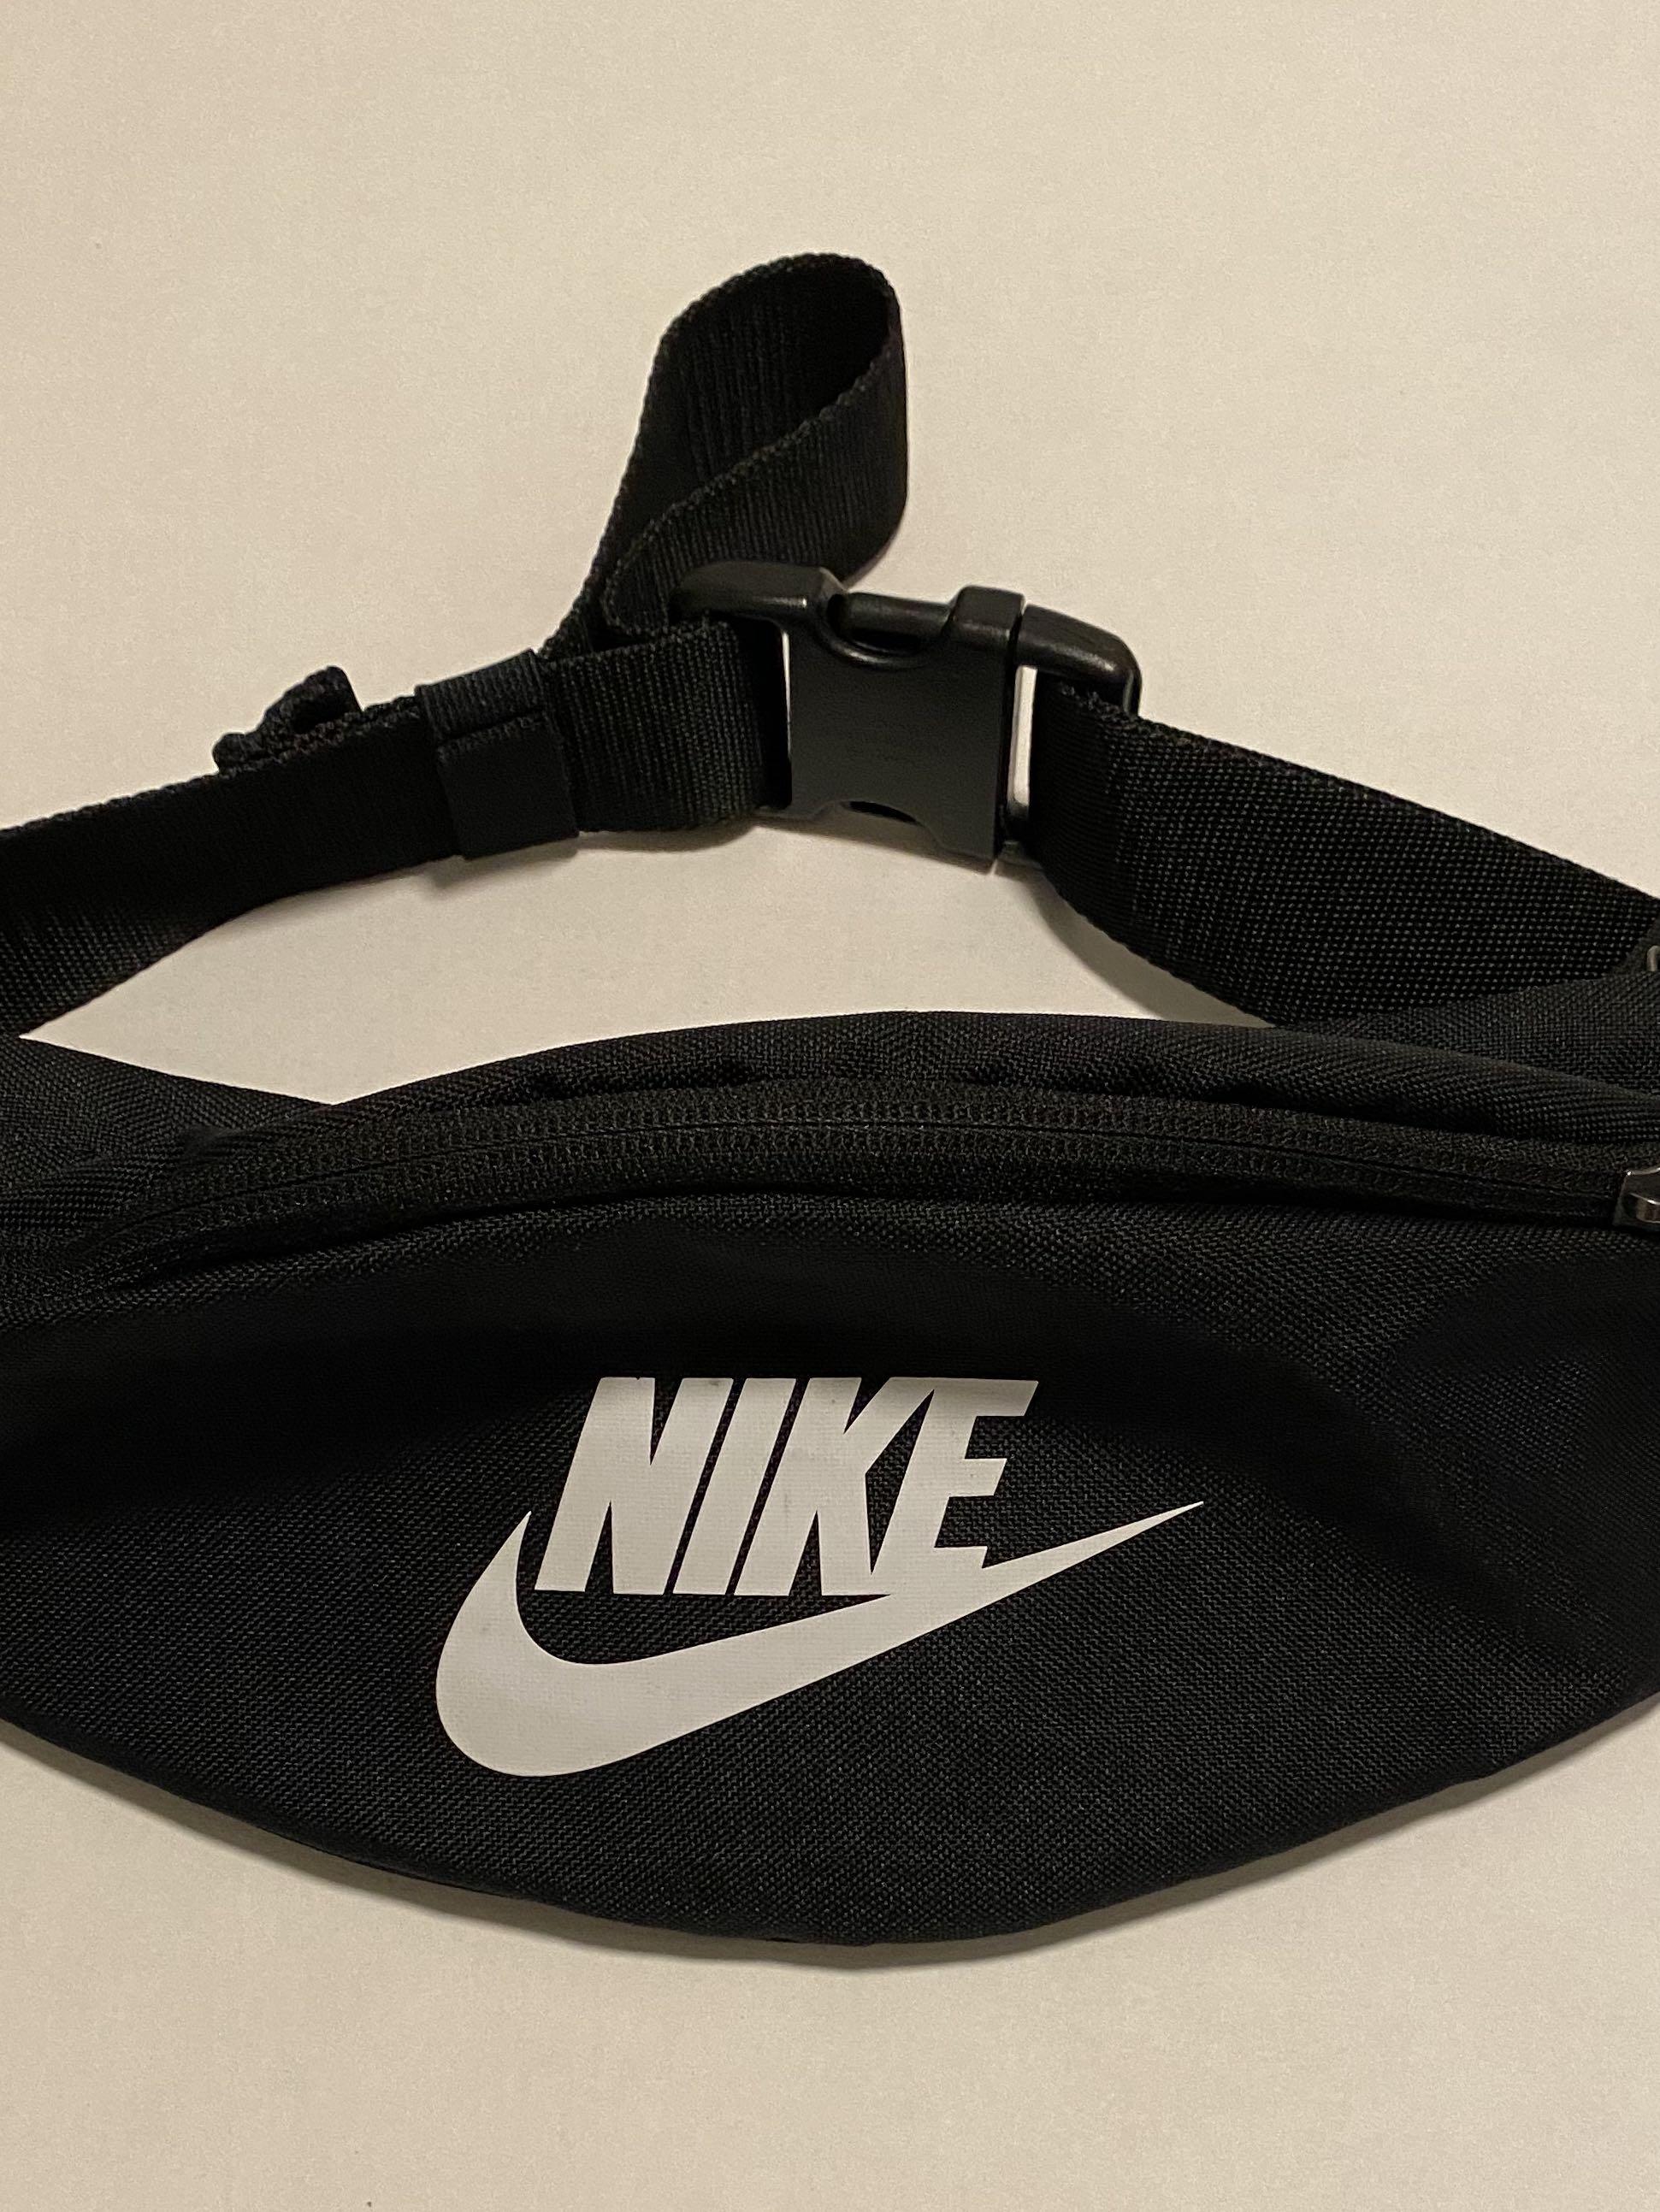 Nike Belt Bag (Authentic), Men's Fashion, Bags, Belt bags, Clutches and ...